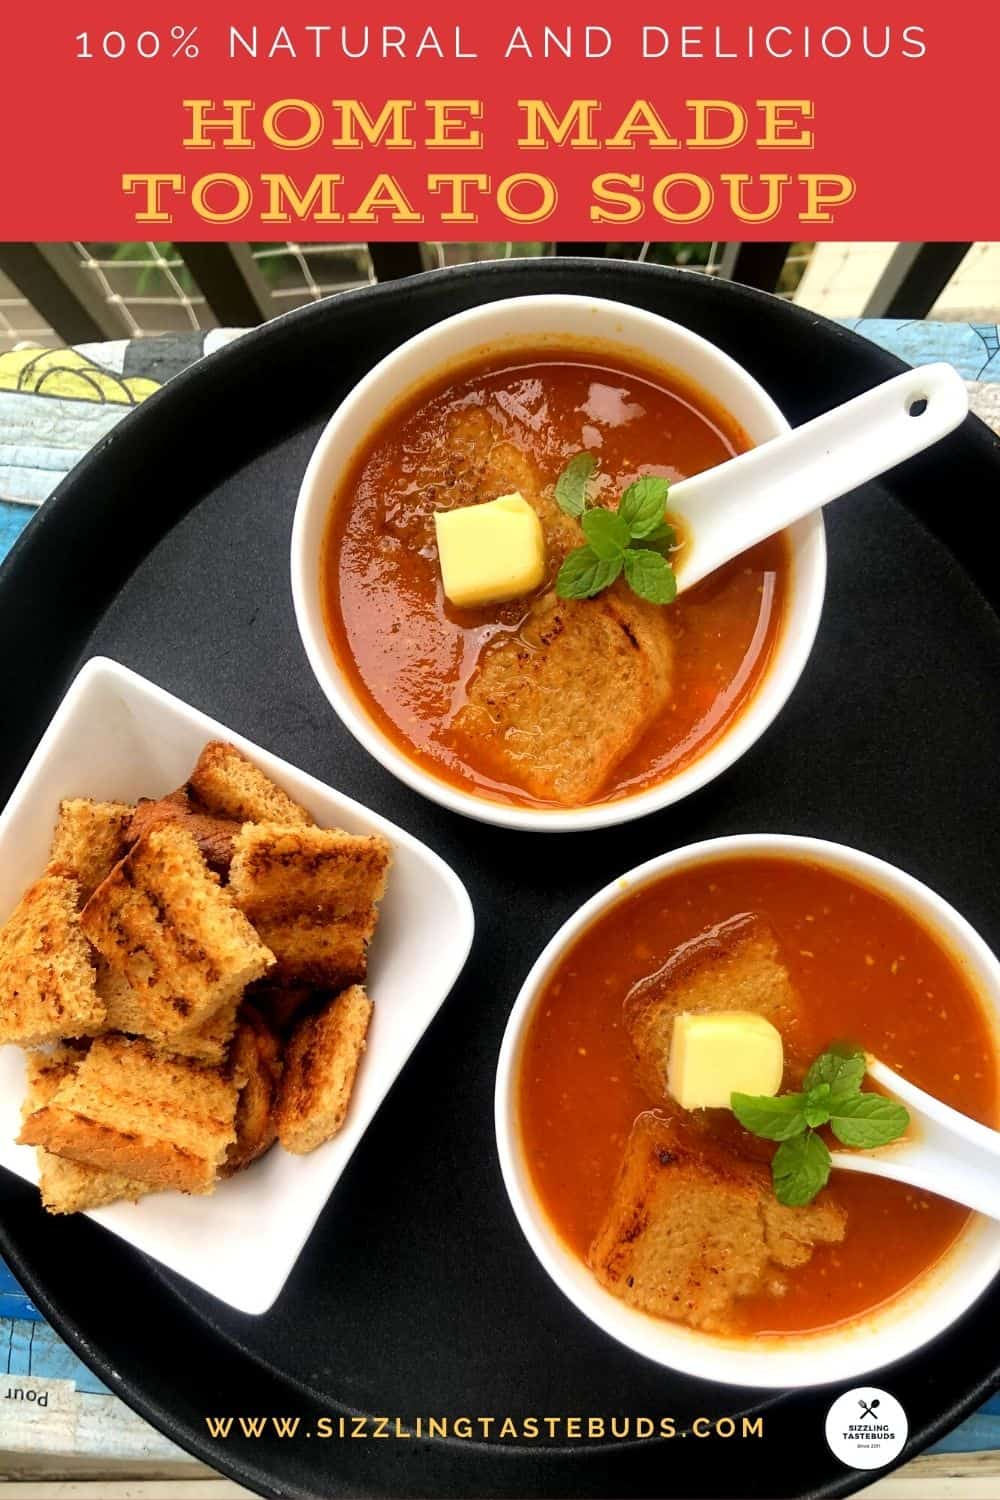 Try this version of the popular Restaurant Style Tomato Soup - No additives, no cornflour and 100% homemade!